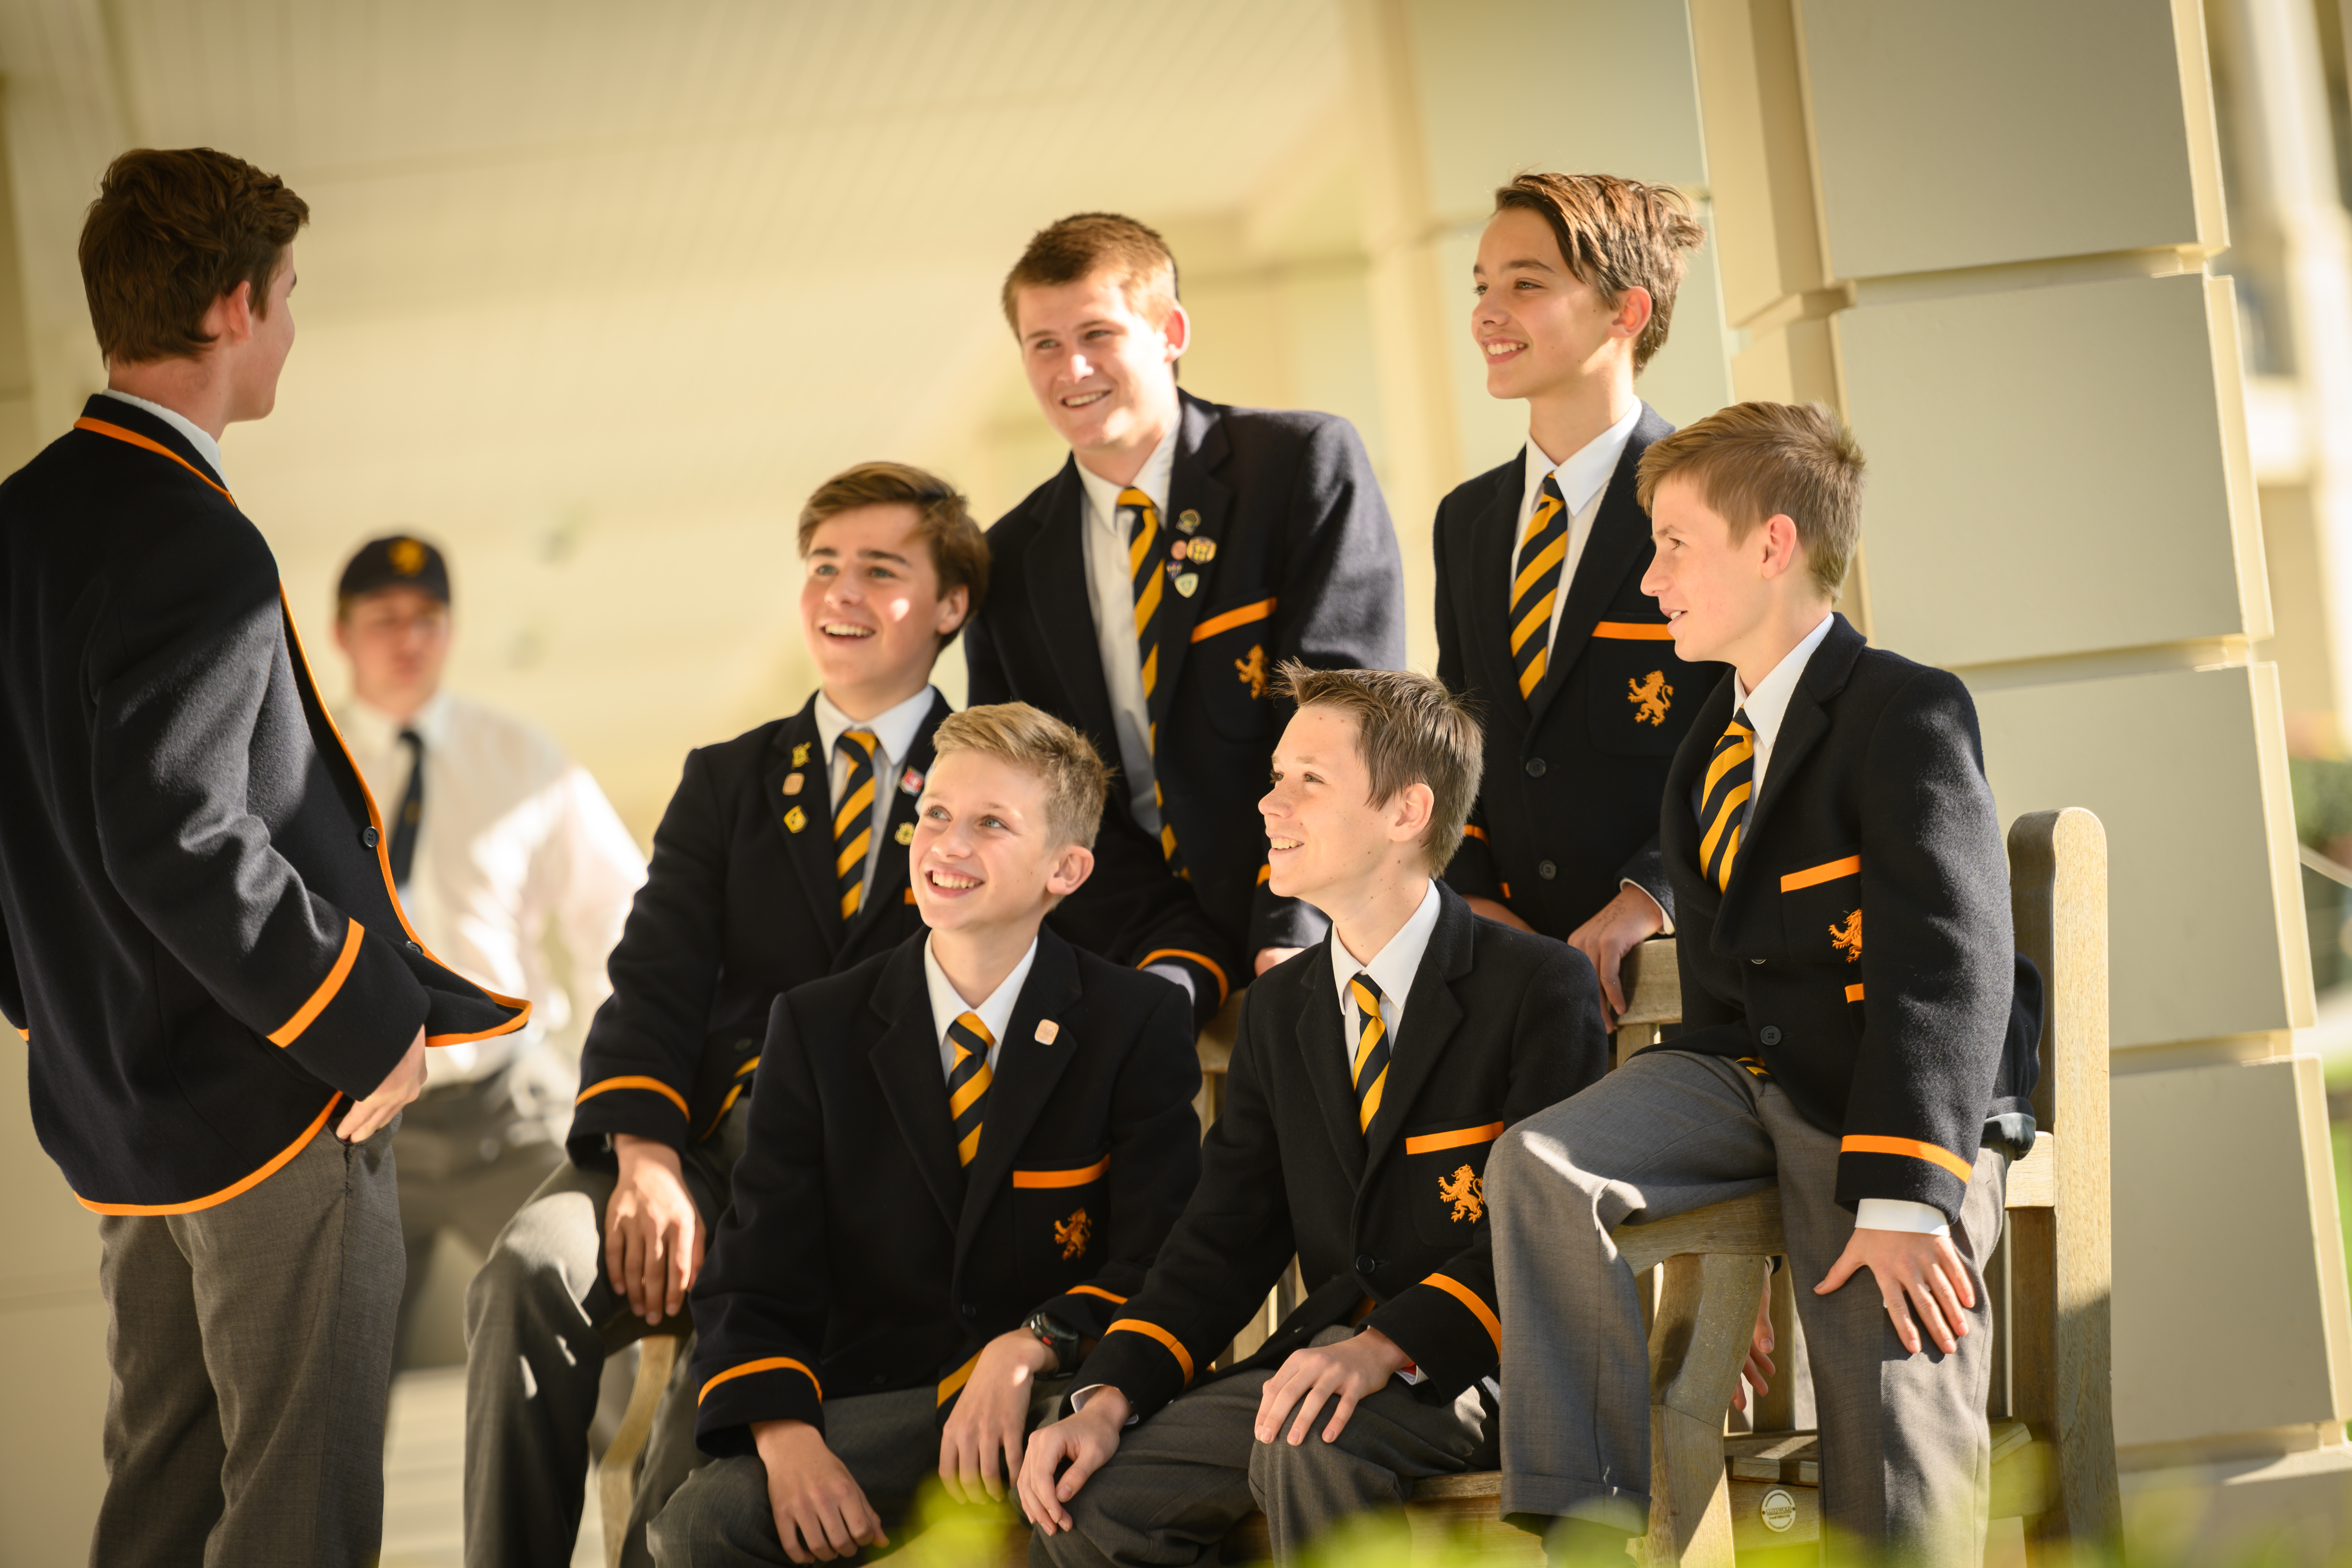 What are the benefits of an all boys education?